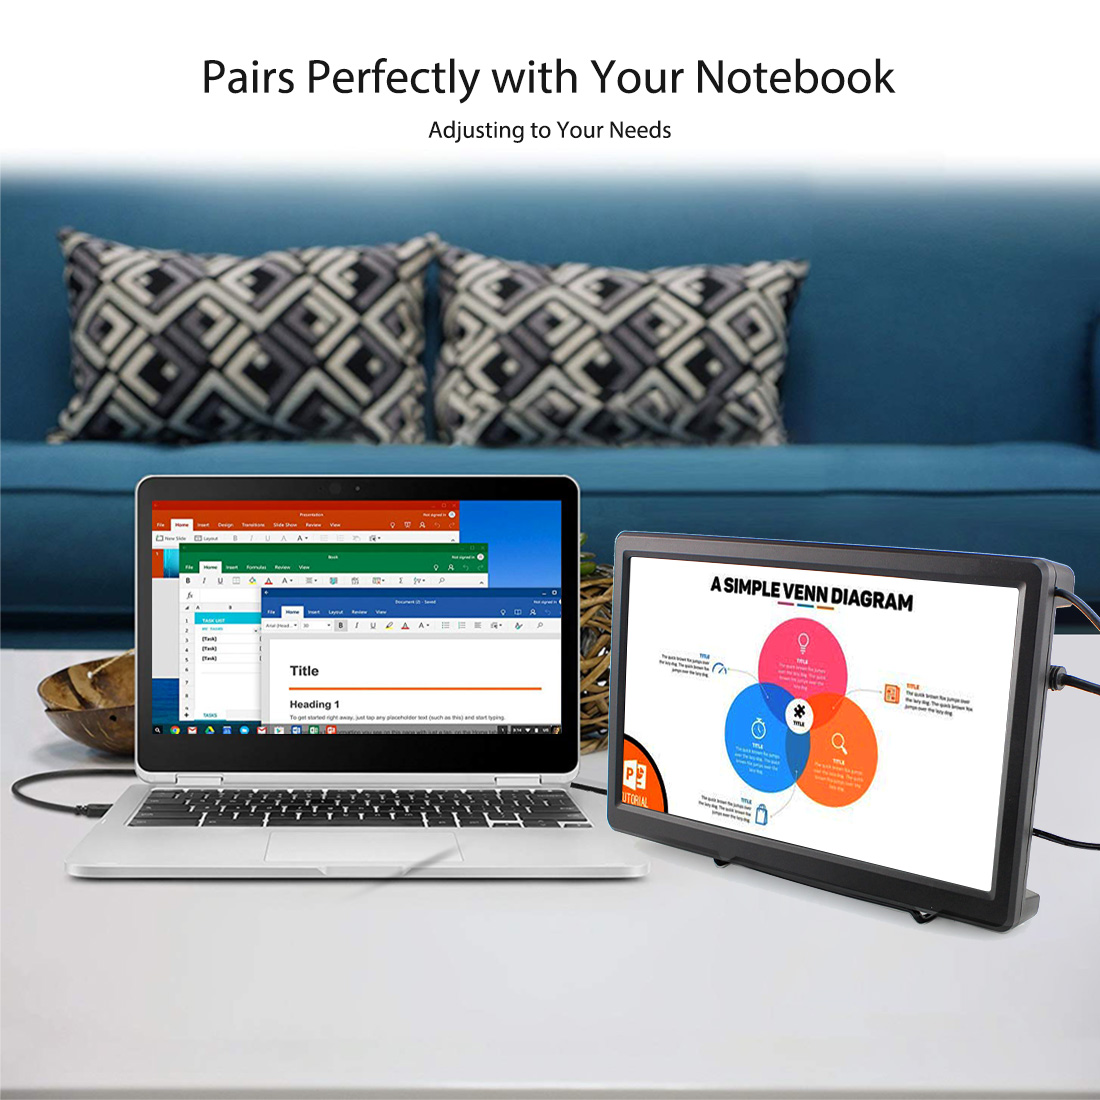 10.1 inch display paris perfectly with your notebook